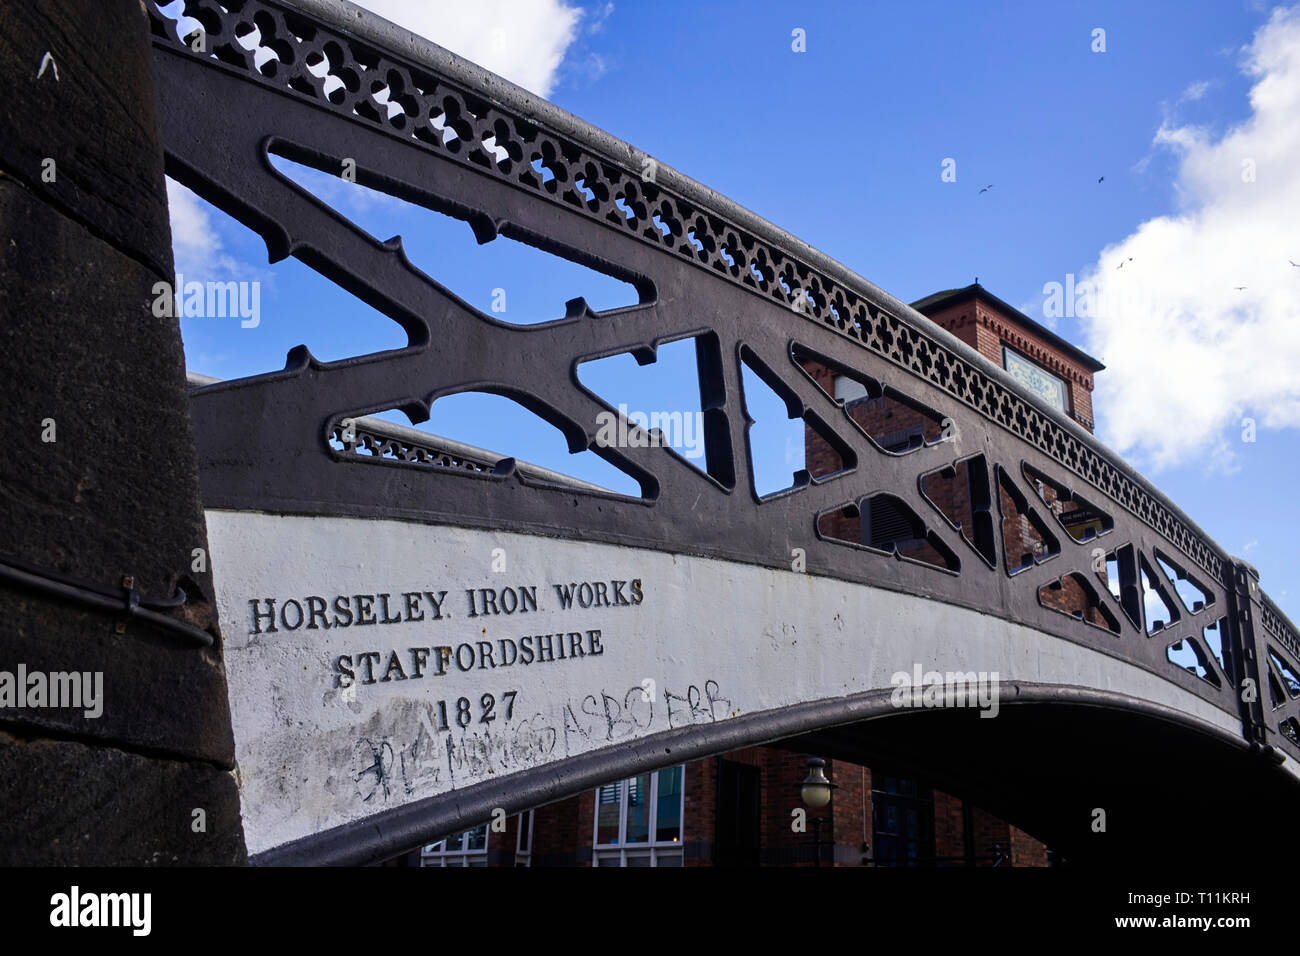 Tindal Bridge in the BCN built by Horseley Iron Works, Staffordshire 1827 Stock Photo